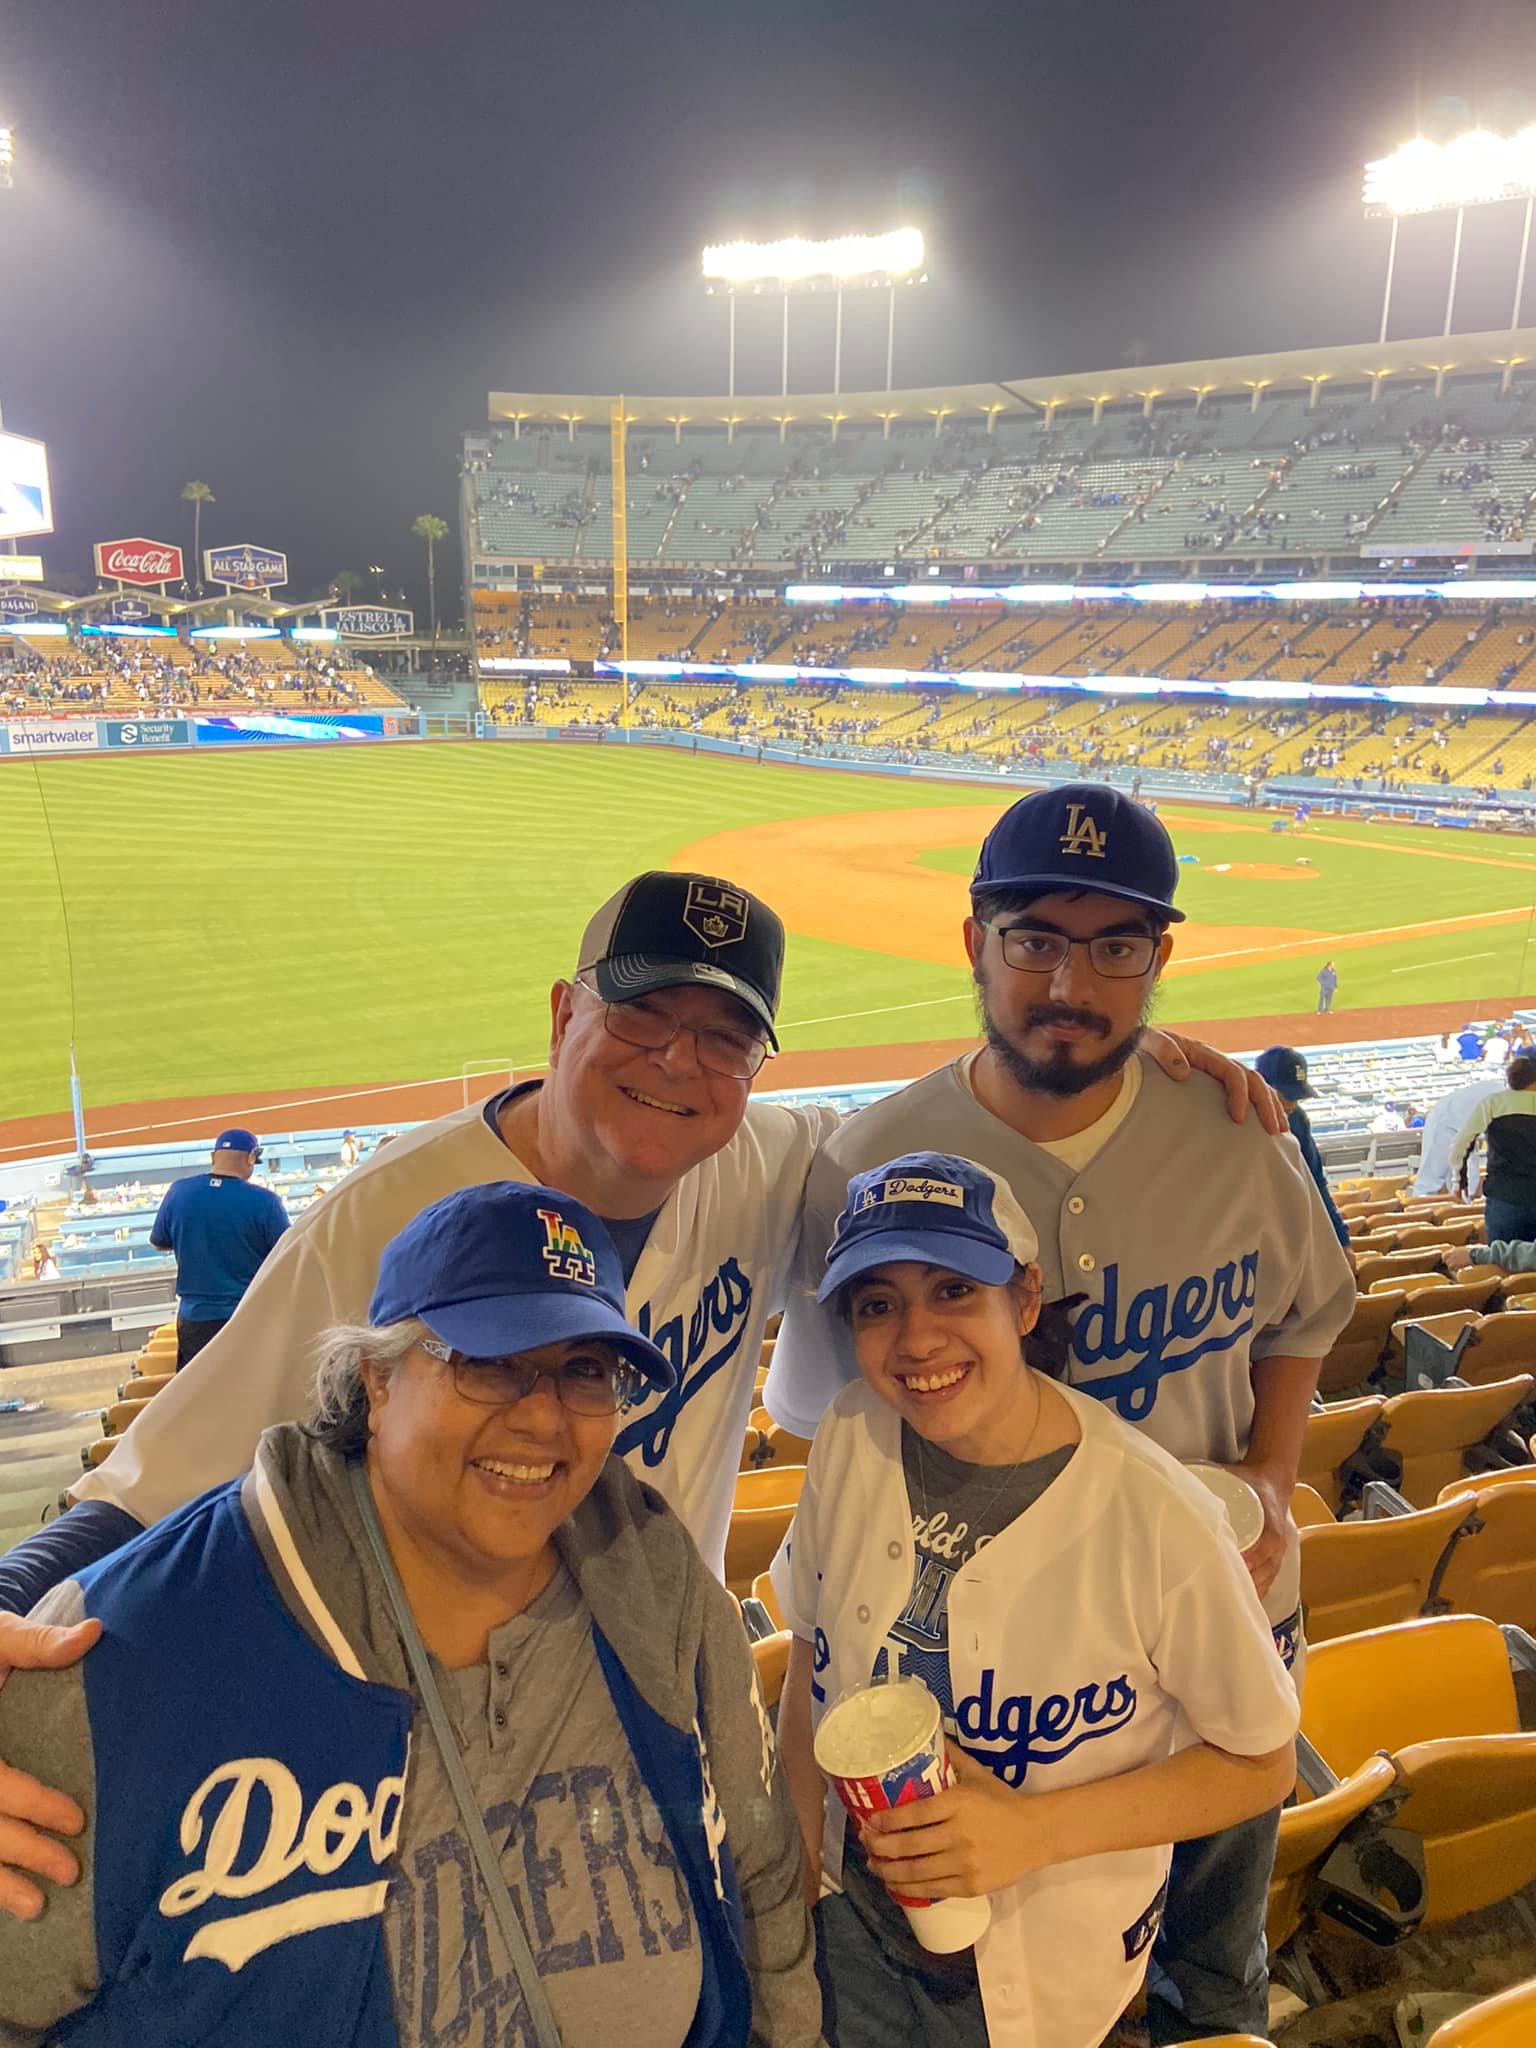 A picture of my family and I at a baseball game